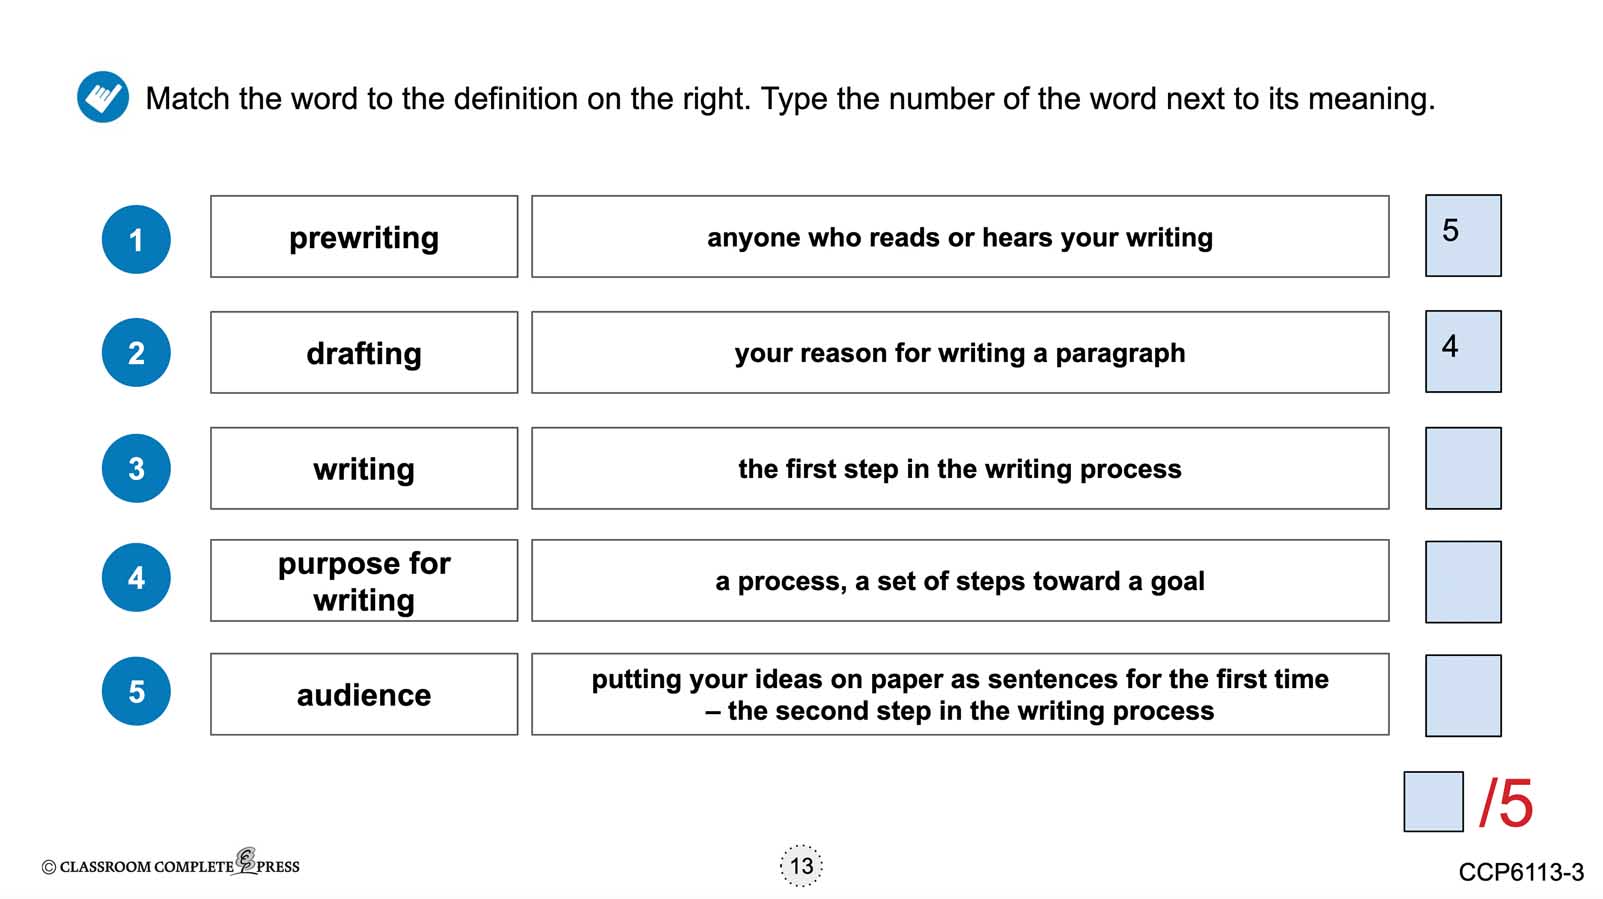 How to Write a Paragraph: Prewriting Practice & Drafting Your Paragraph - Google Slides Gr. 5-8 - eBook